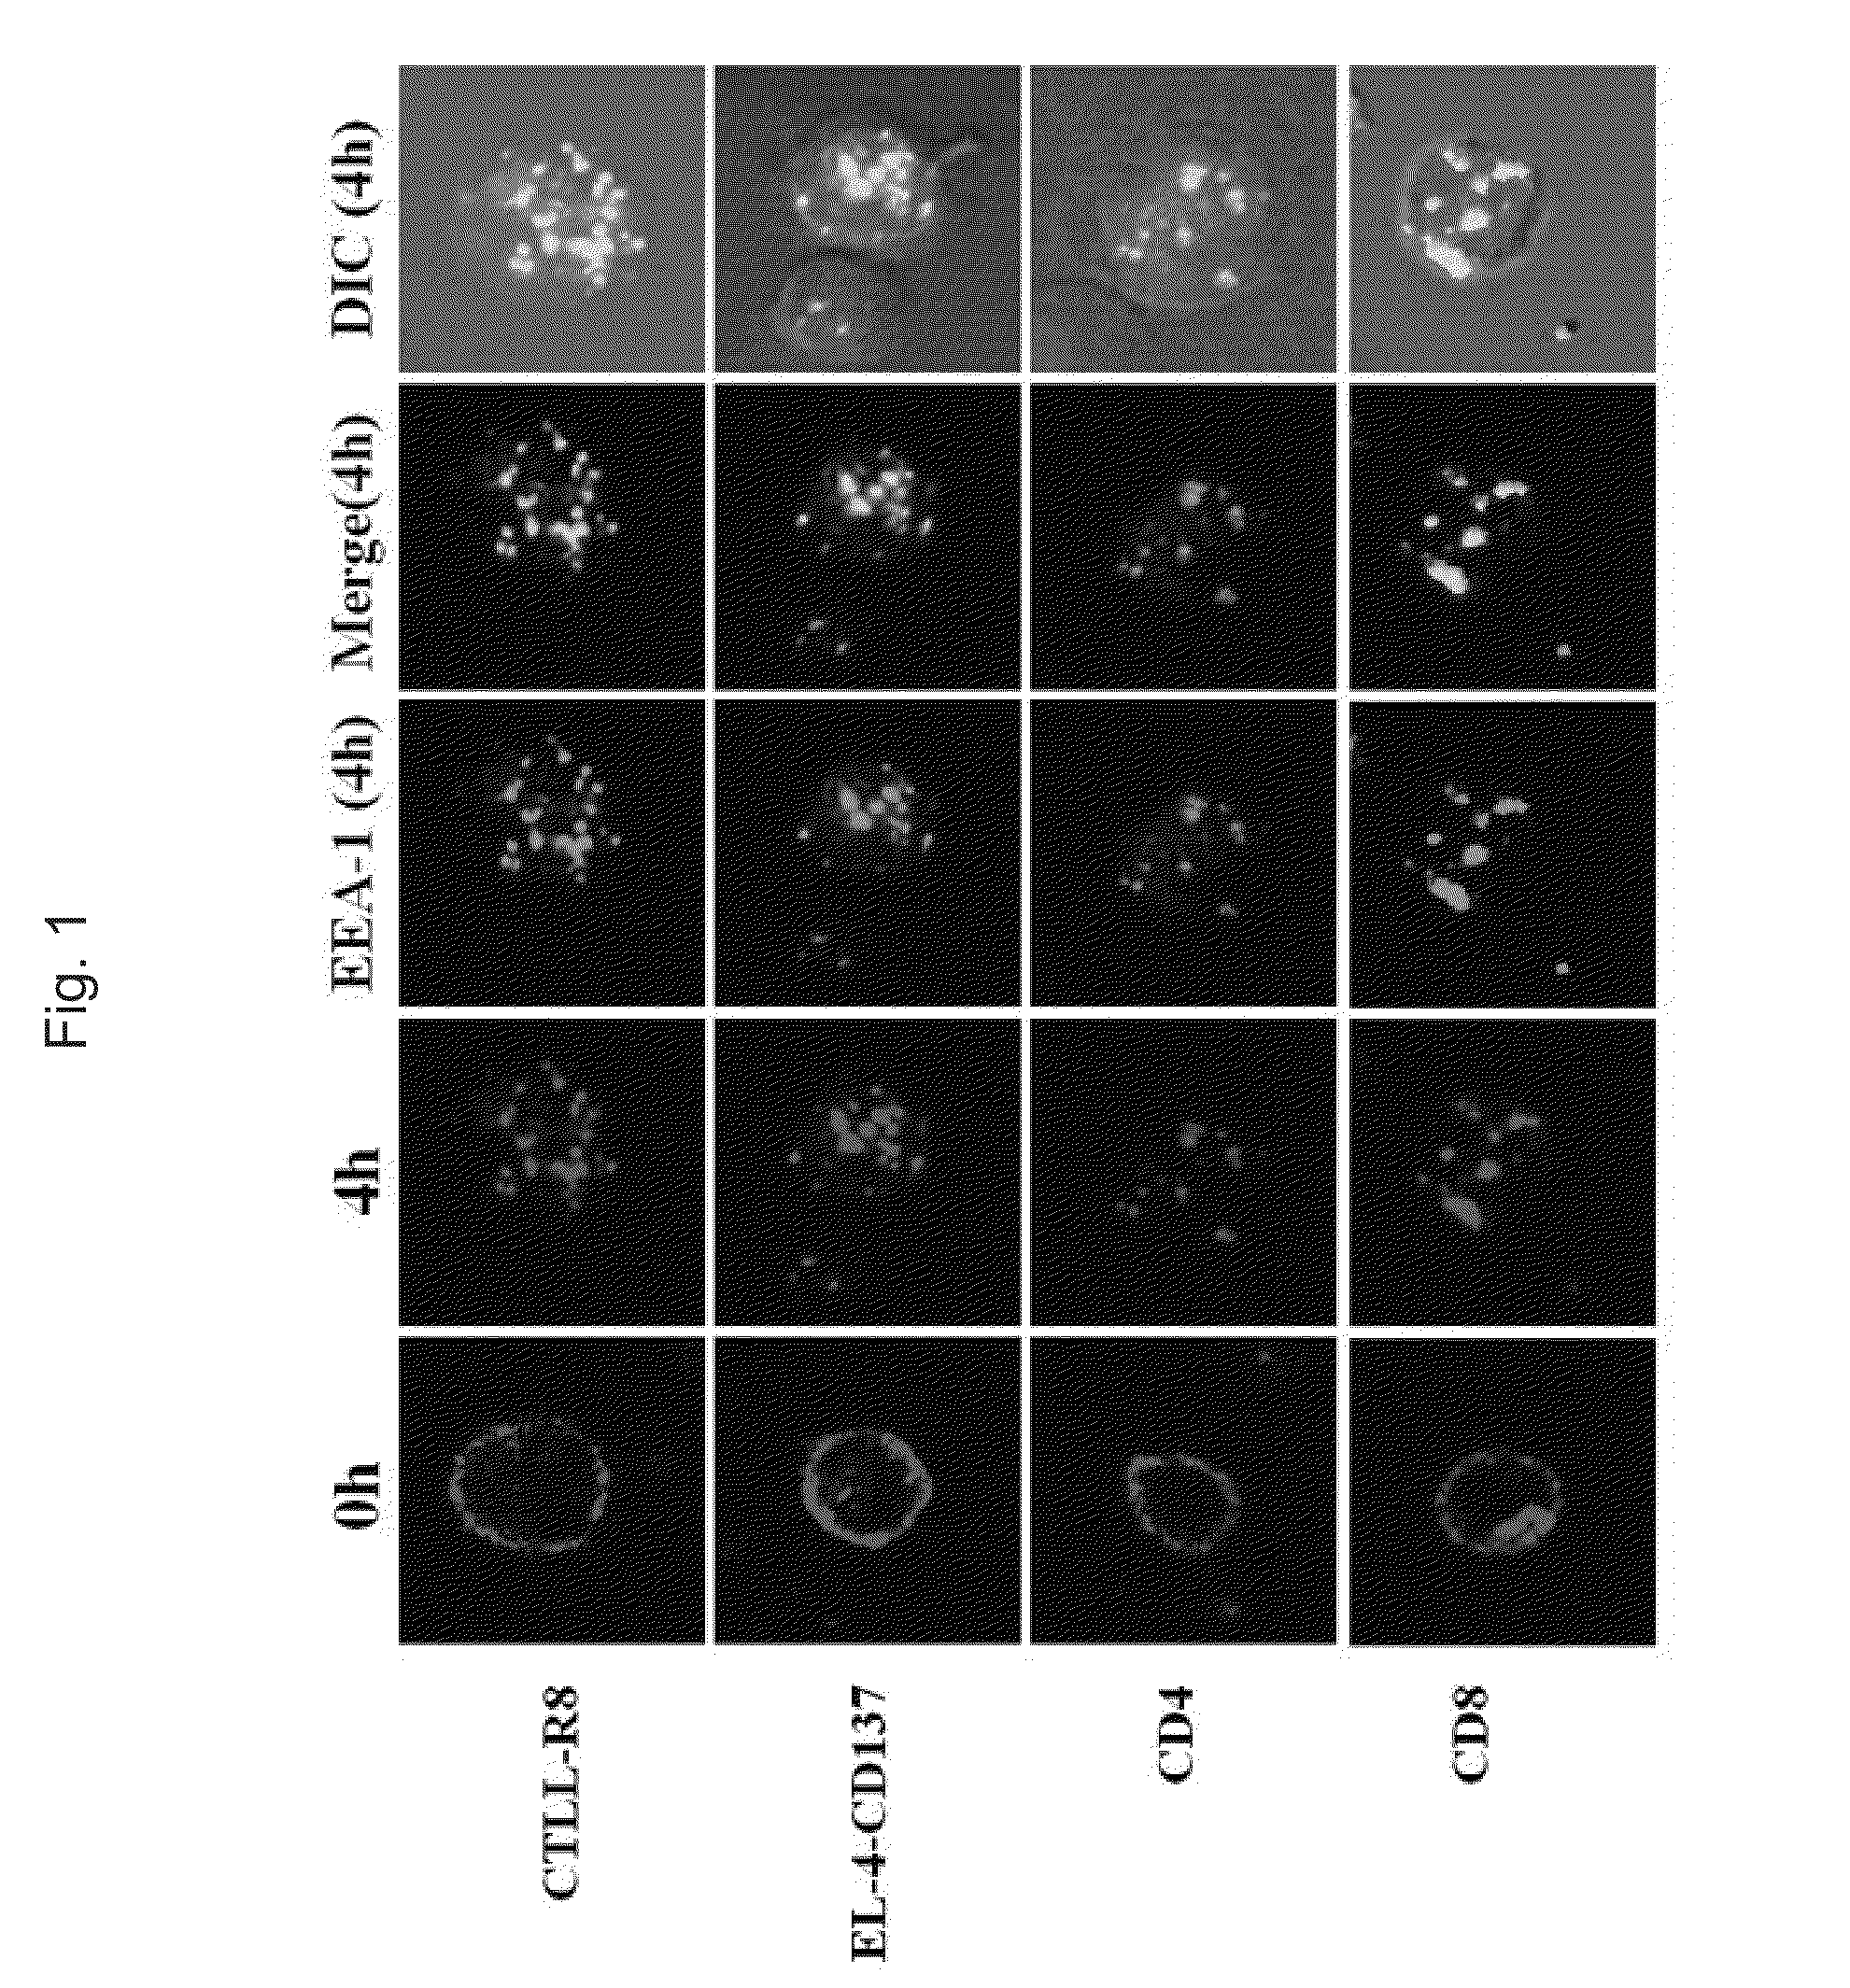 Method for selective depletion of cd137 positive cells using Anti-cd137 antibody-toxin complex